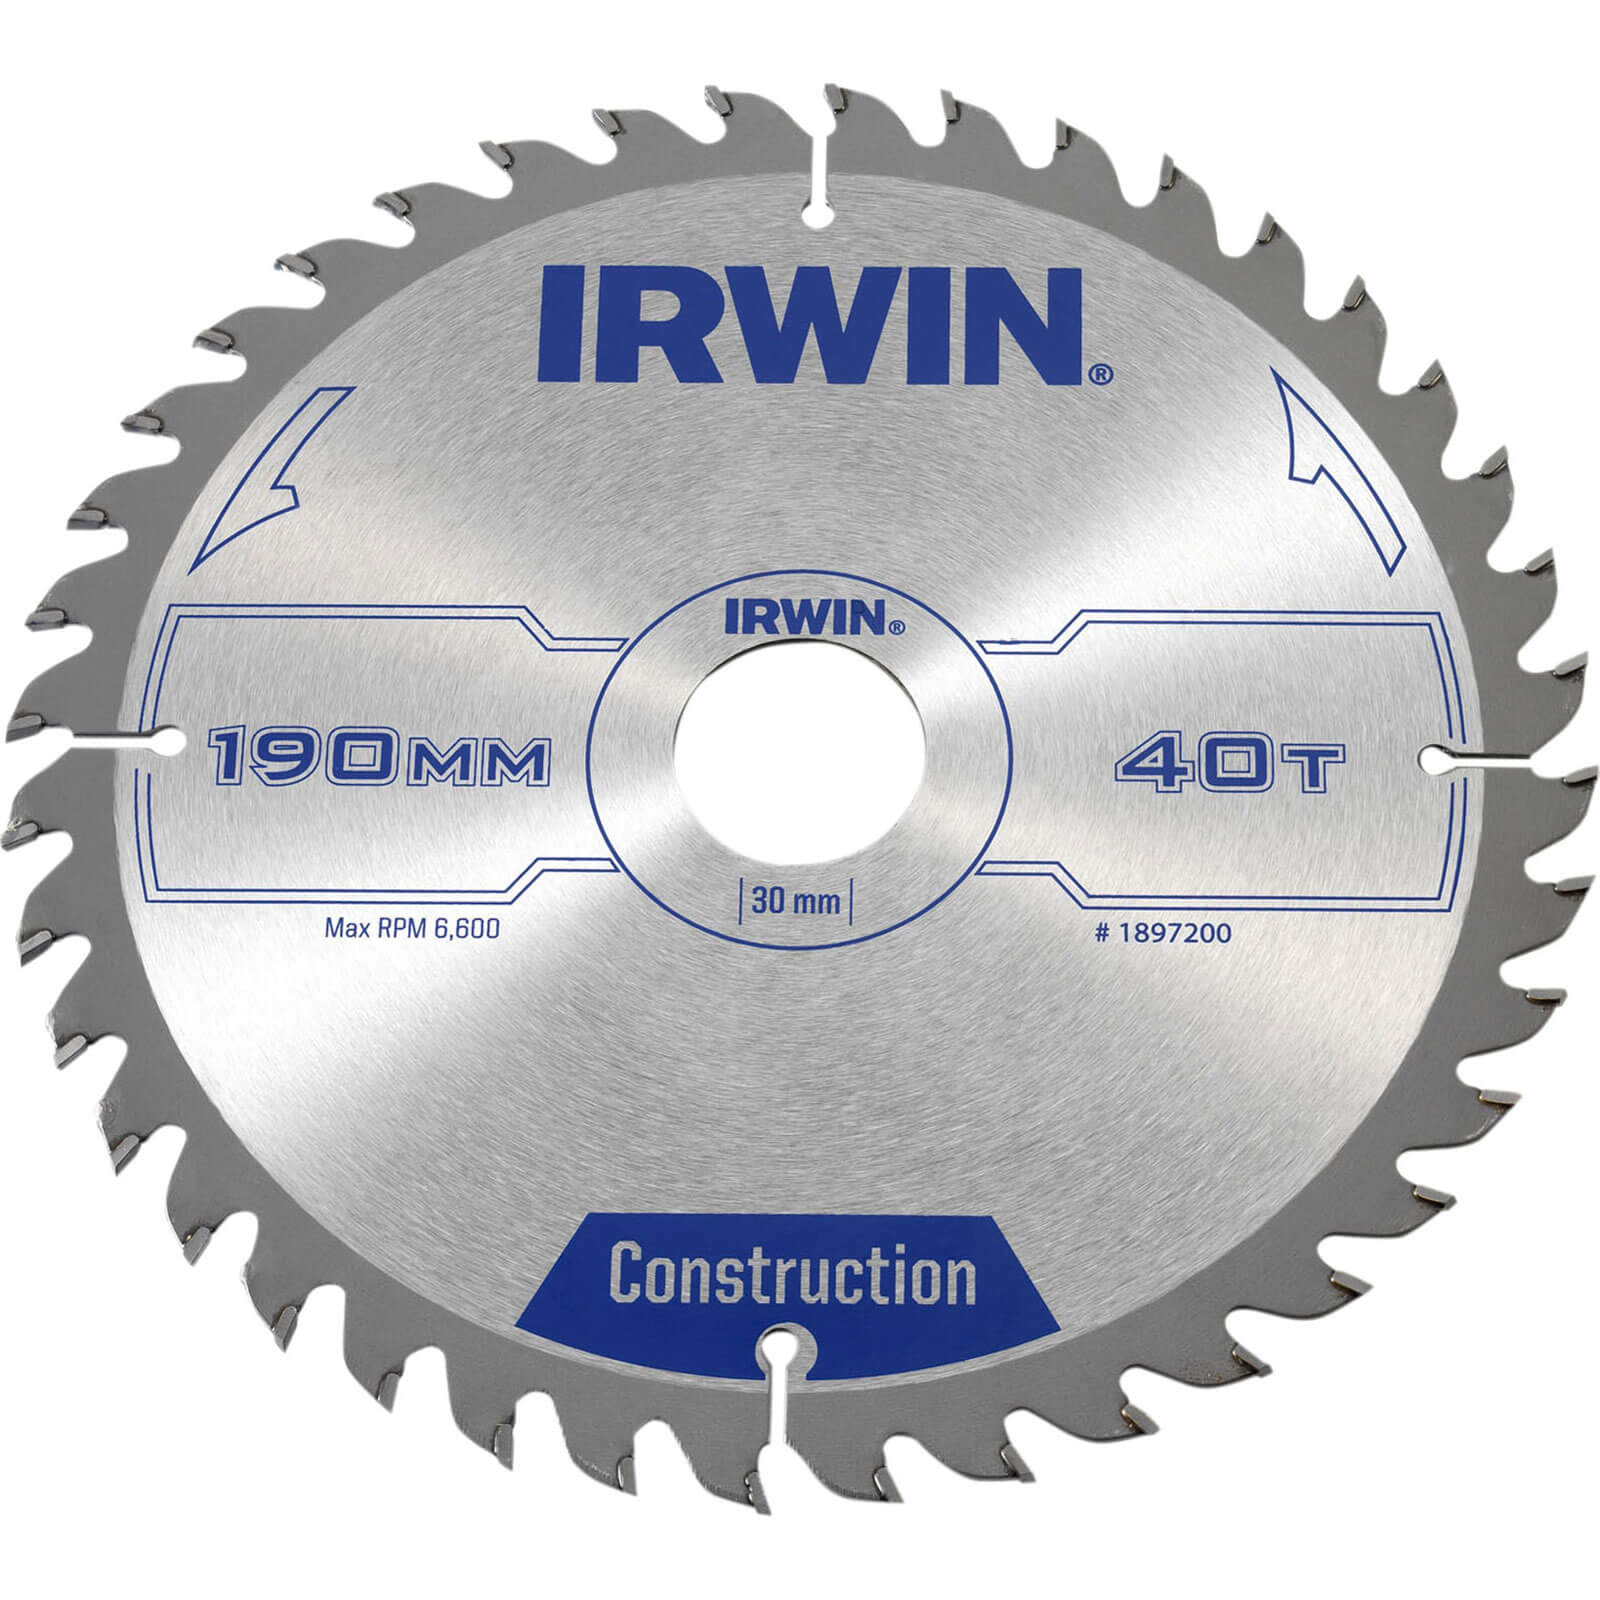 Image of Irwin ATB Construction Circular Saw Blade 190mm 40T 30mm